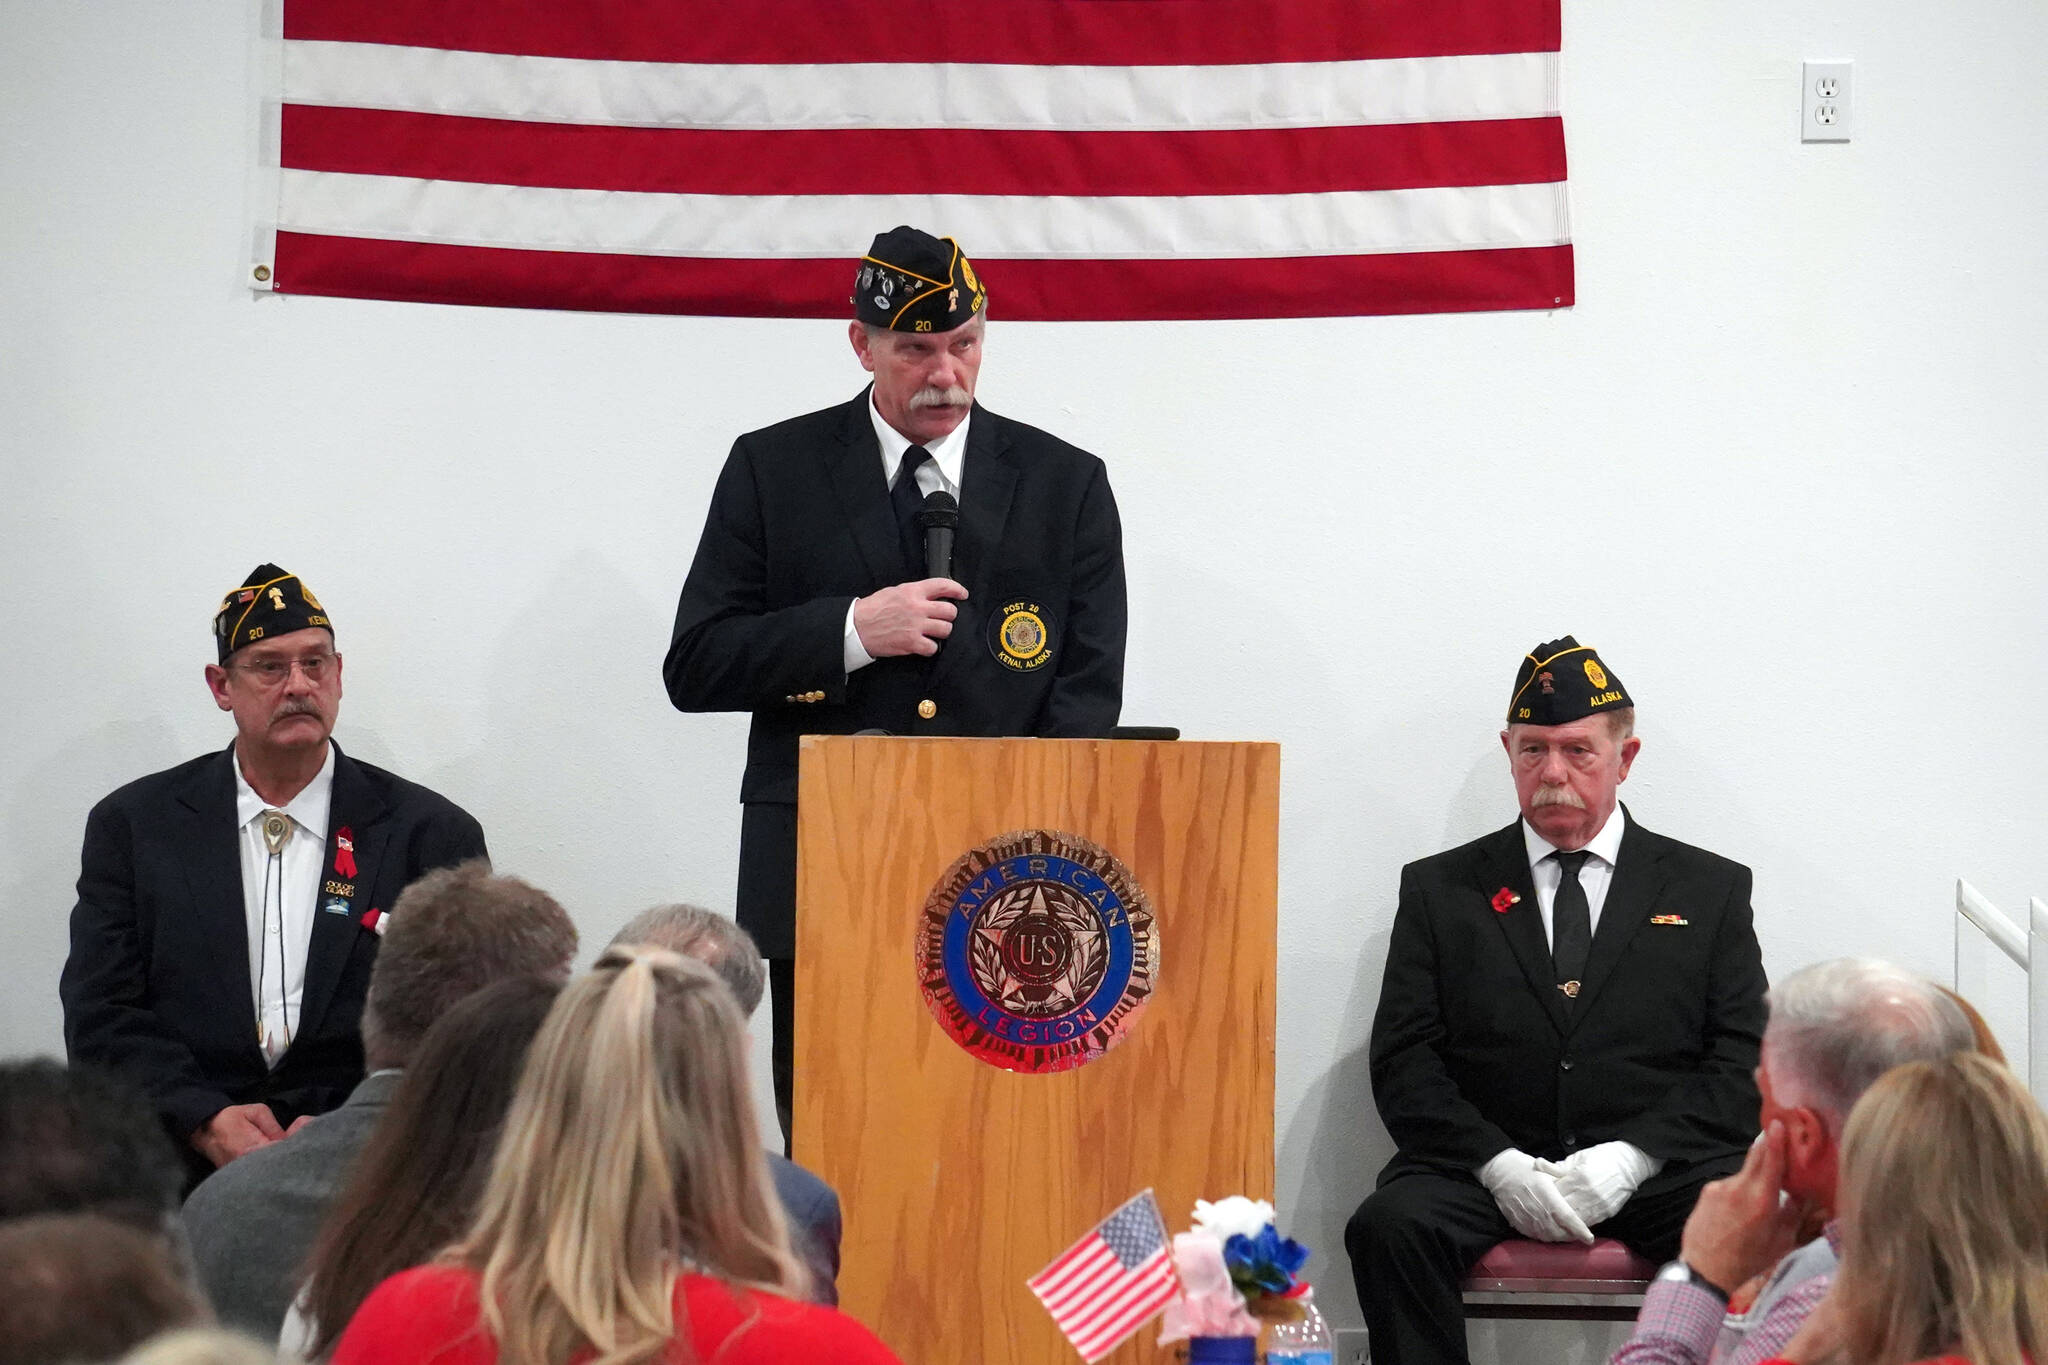 American Legion Post 20 Cmdr. Ron Homan, center, is joined onstage by Past Cmdr. Dave Segura and Chaplain Mike Meredith while speaking during a Veterans Day celebration at the American Legion Post 20 in Kenai, Alaska, on Saturday, Nov. 11, 2023. (Jake Dye/Peninsula Clarion)